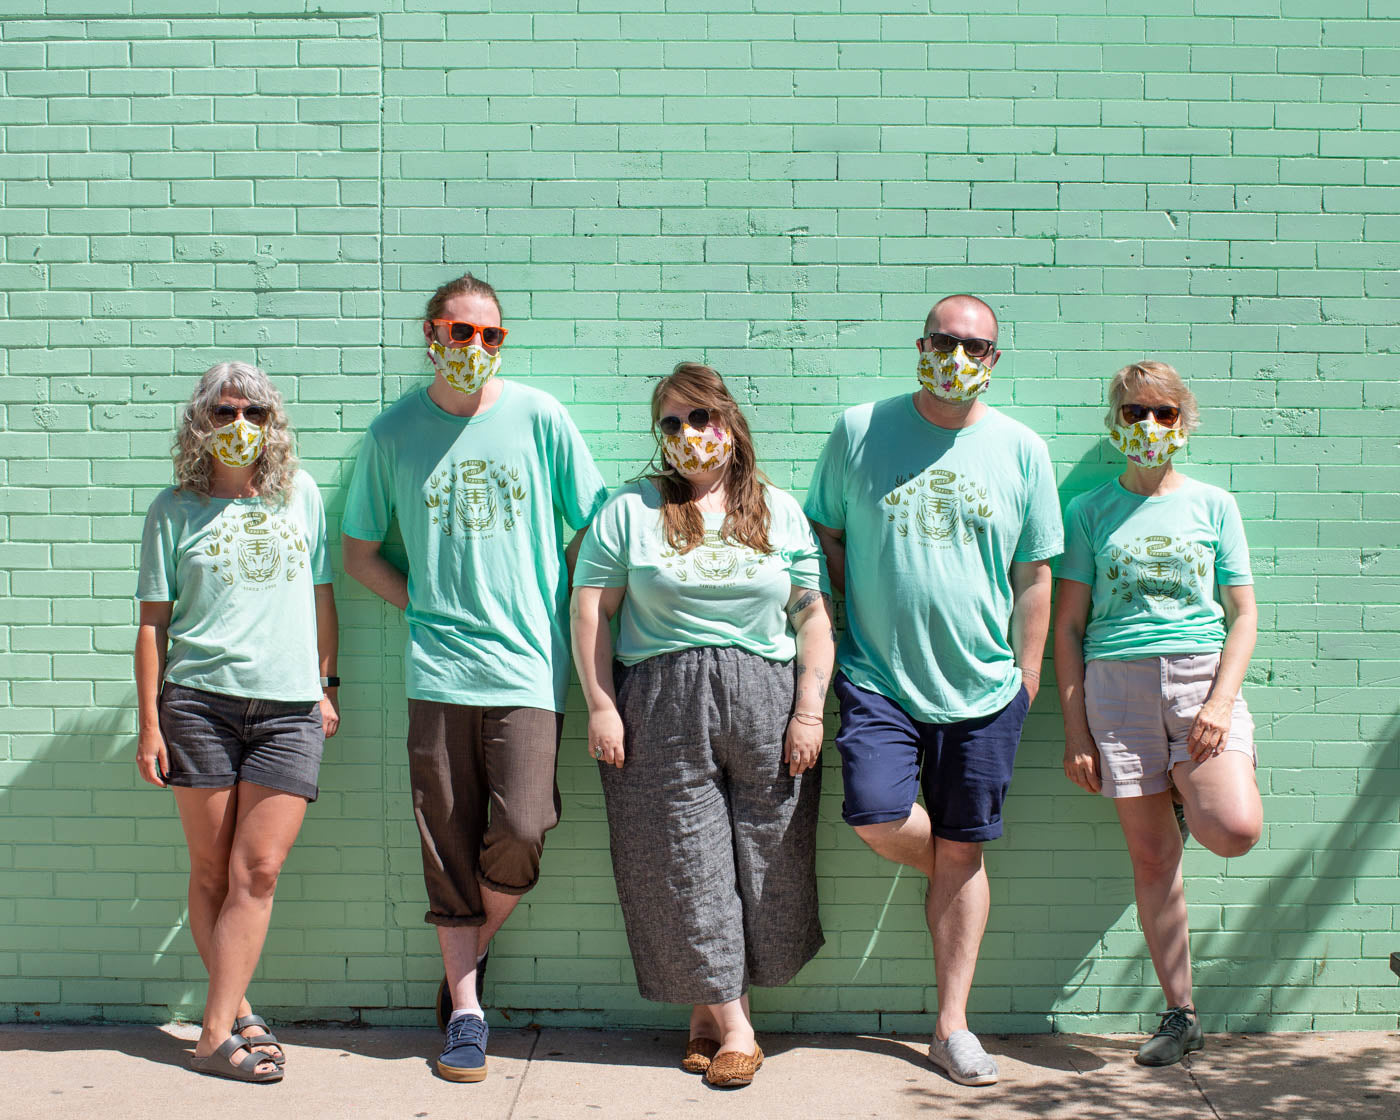 Five people, men and women, wearing matching mint green T-shirts against a mint green wall on a city sidewalk.